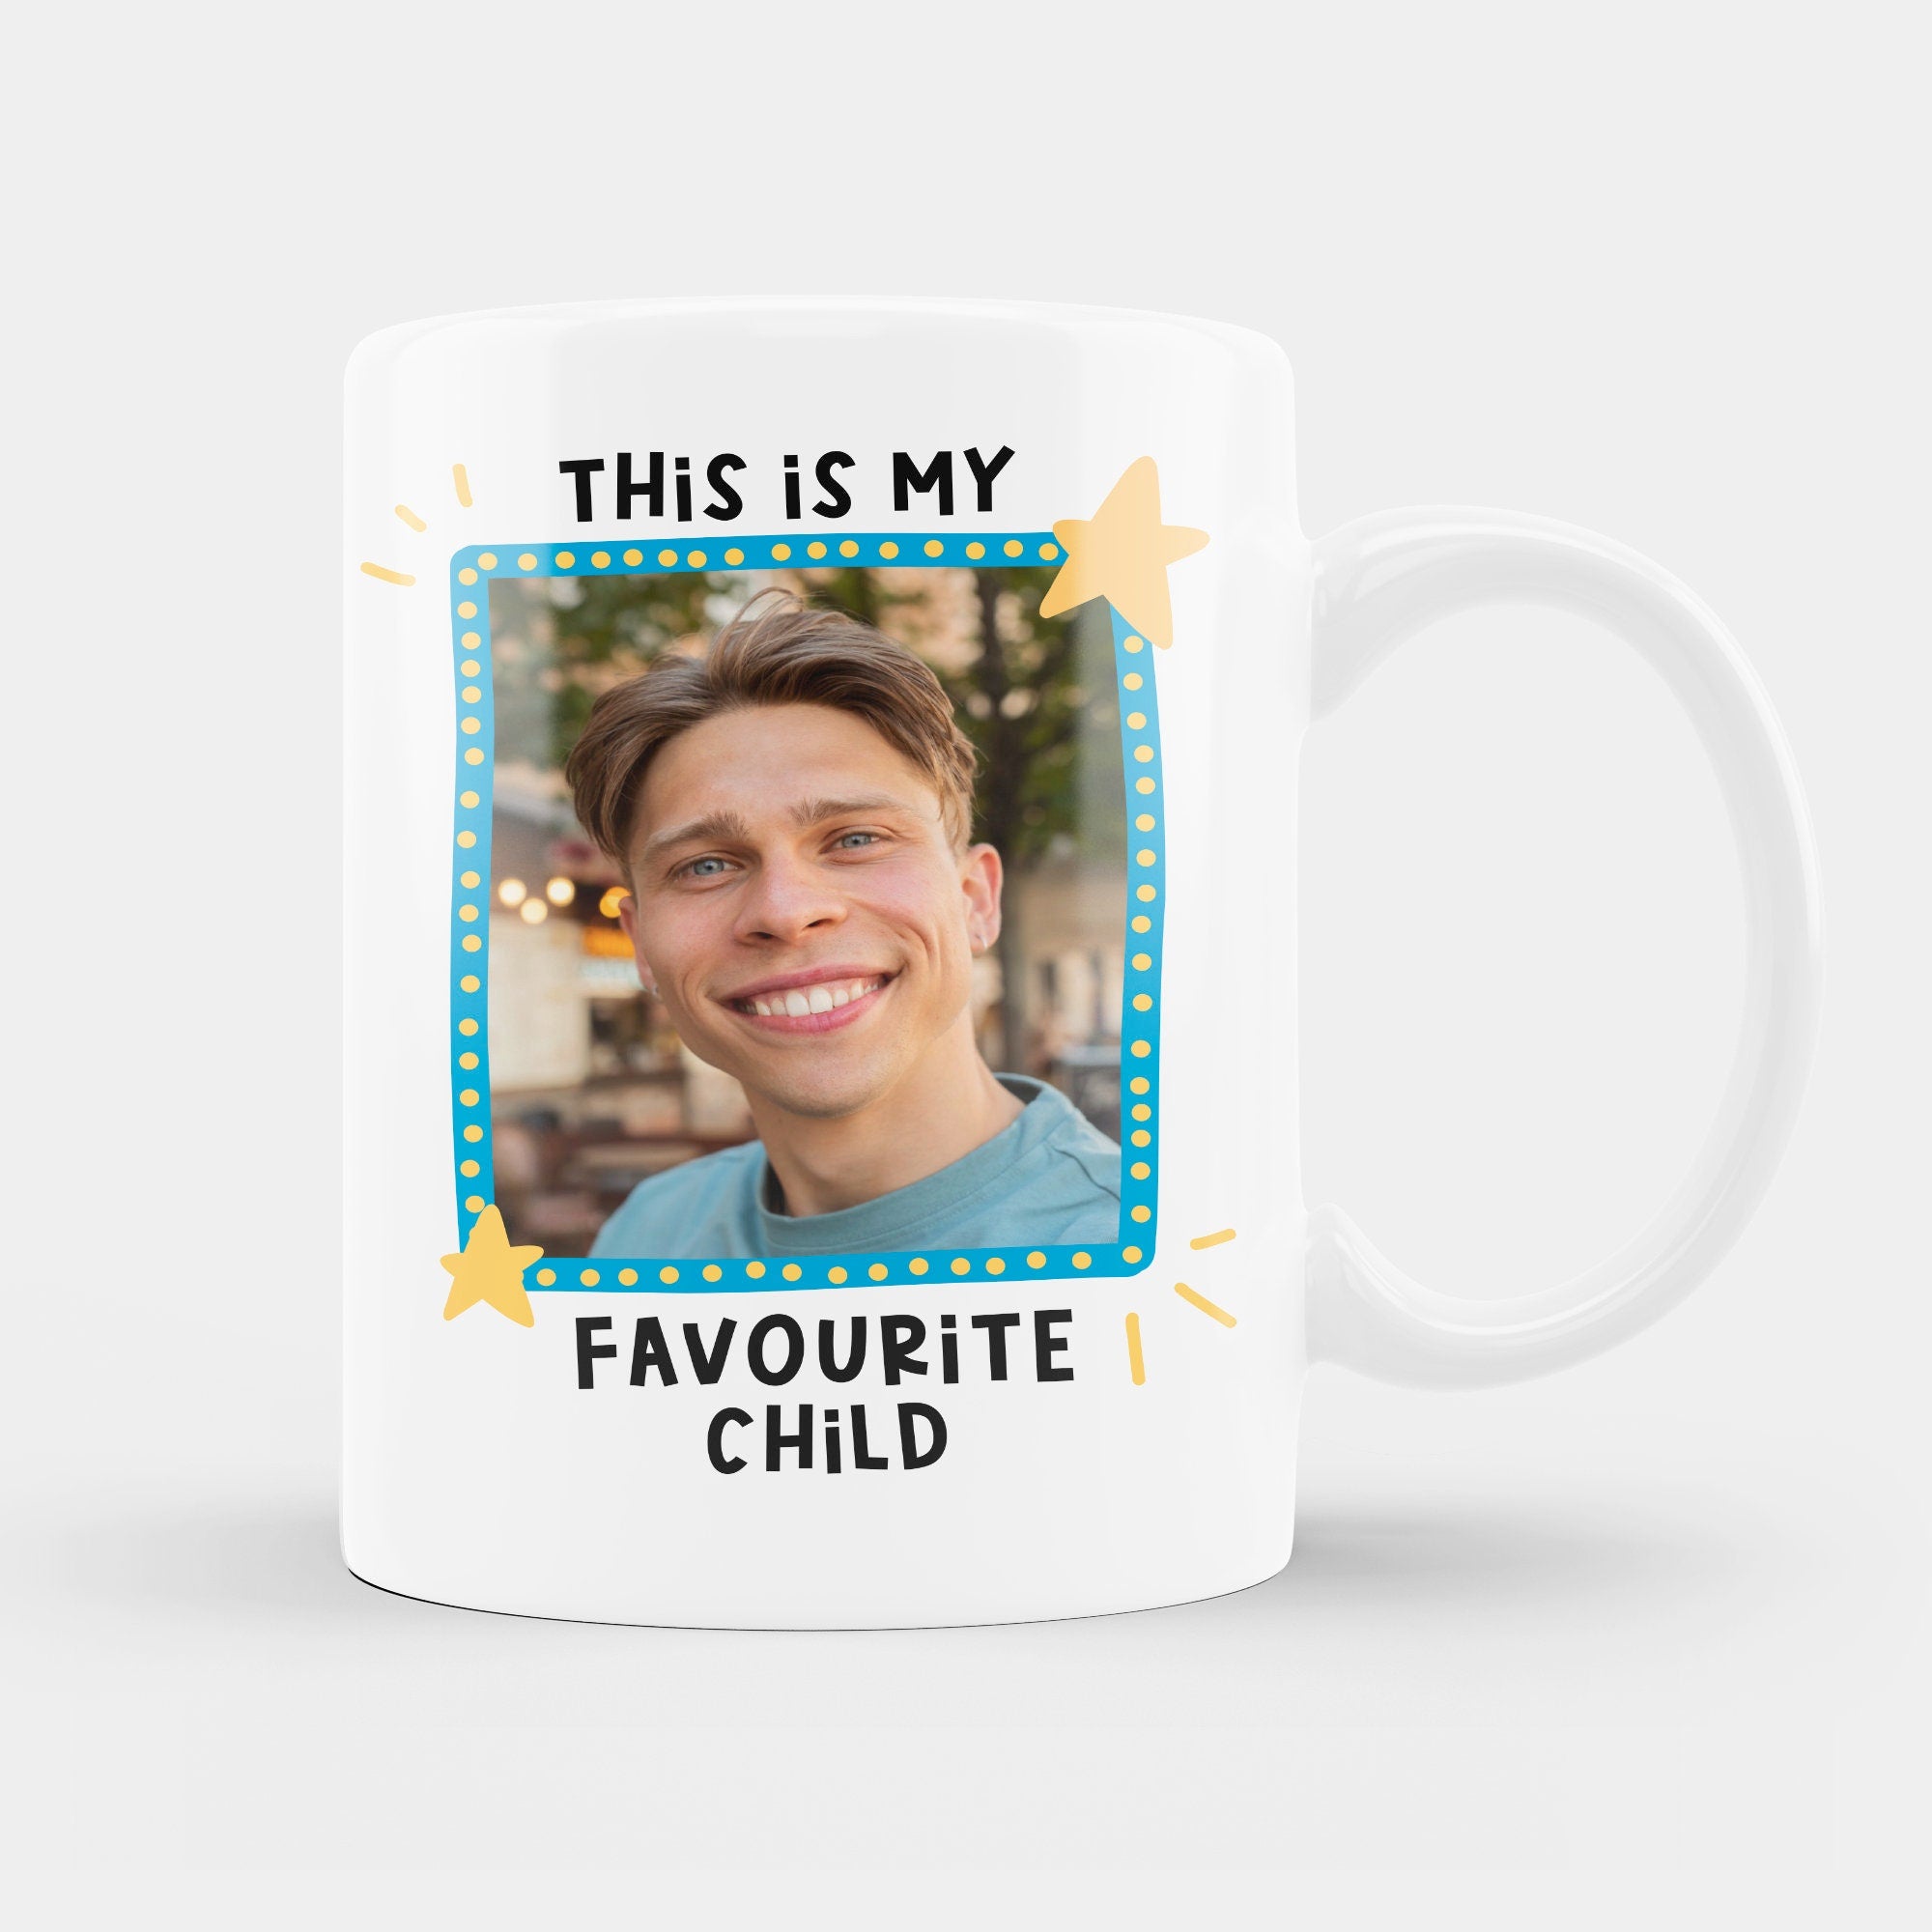 Personalised Photo Mug, Funny Favourite Child Mug, Funny Fathers Day Gift, Funny Cup for Dad, Funny Birthday Gift Dad, Father's